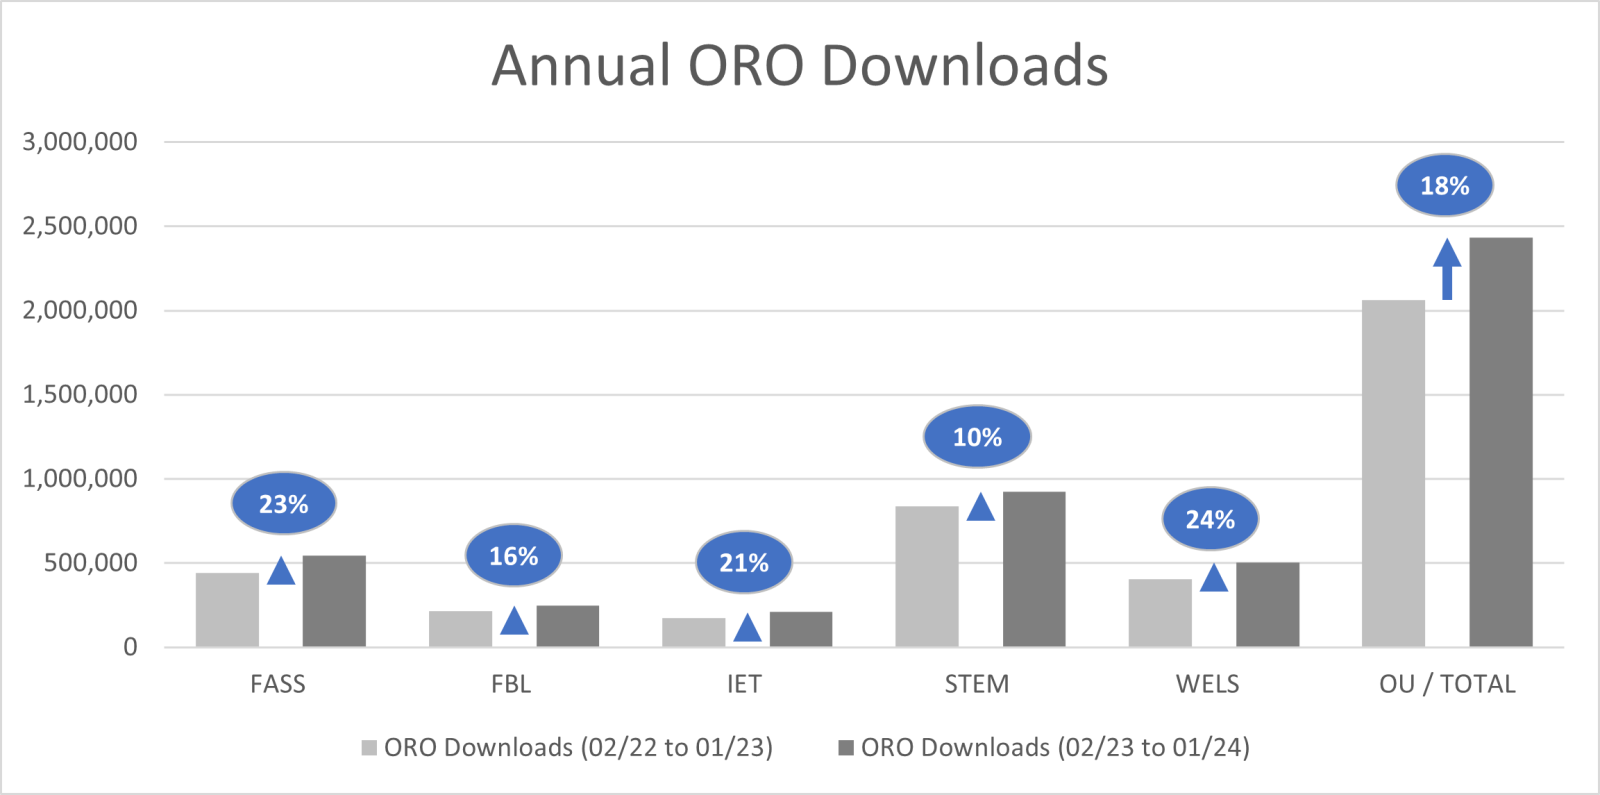 Bar chart depicting annual ORO downloads